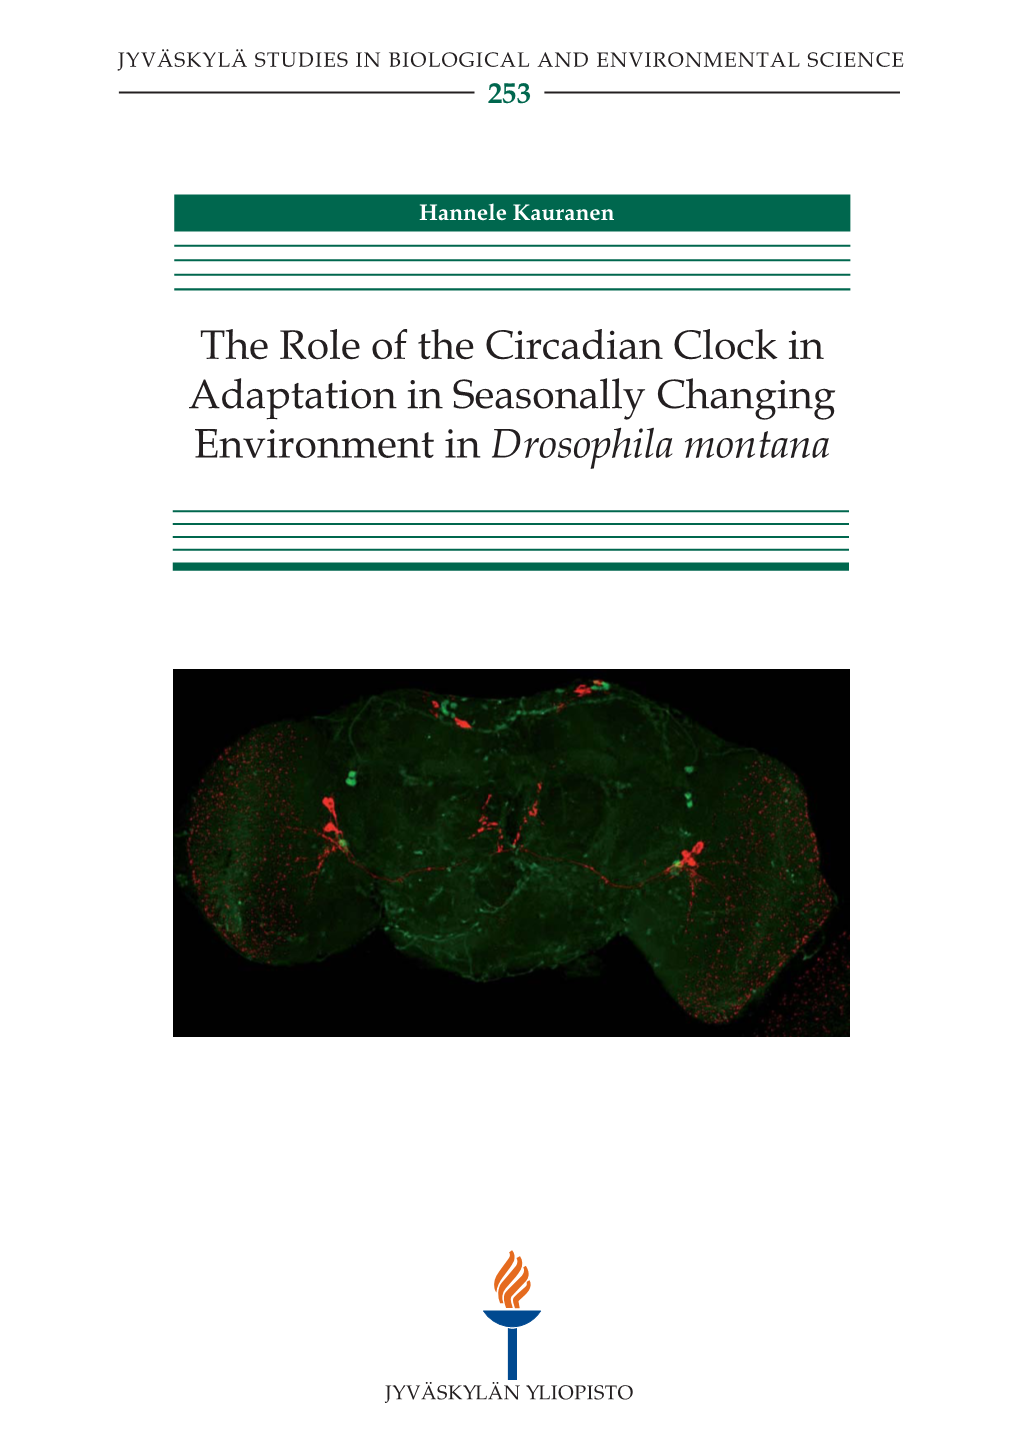 The Role of the Circadian Clock in Adaptation in Seasonally Changing Environment in Drosophila Montana JYVÄSKYLÄ STUDIES in BIOLOGICAL and ENVIRONMENTAL SCIENCE 253